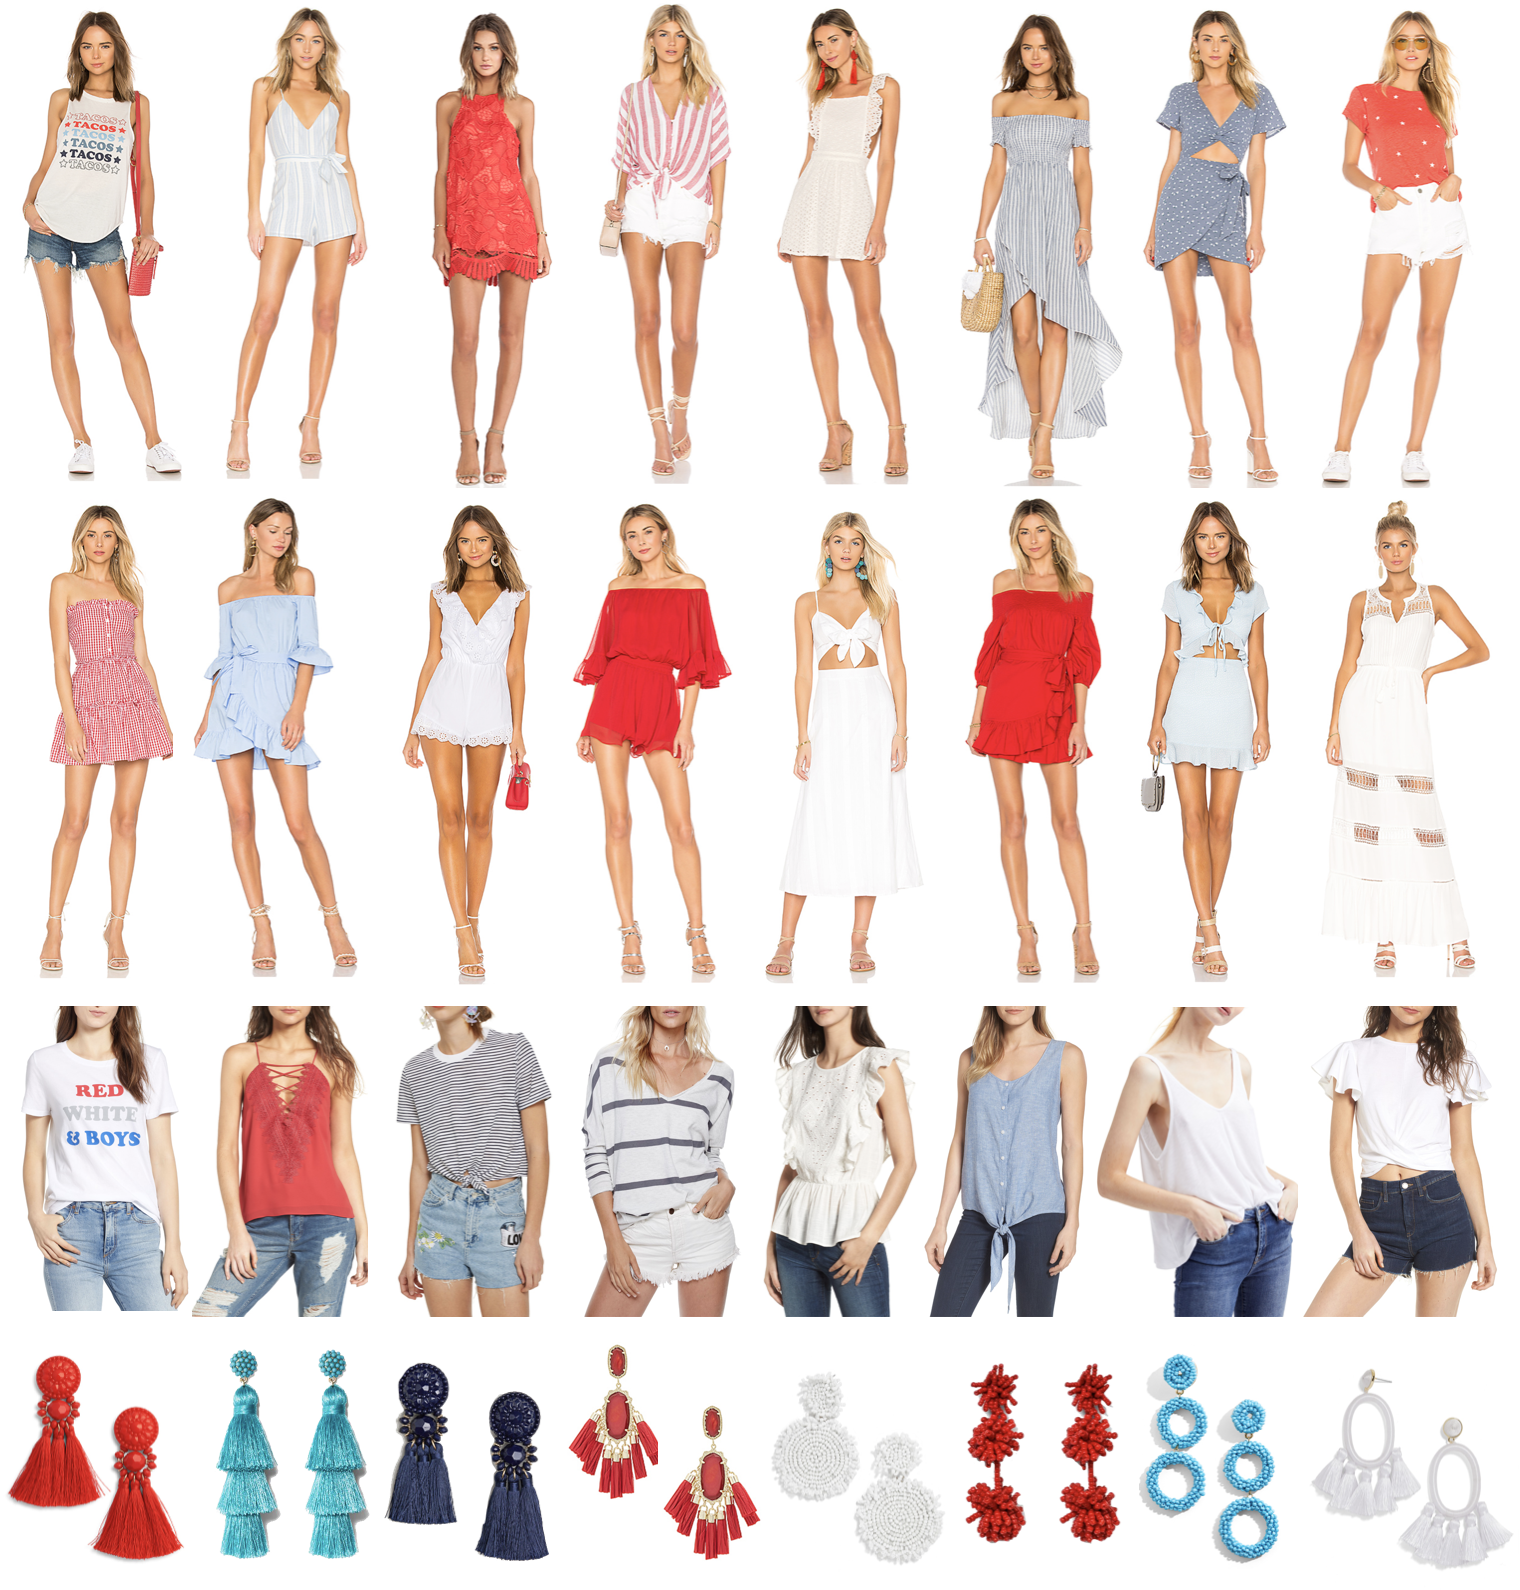 Fourth of July clothing roundup